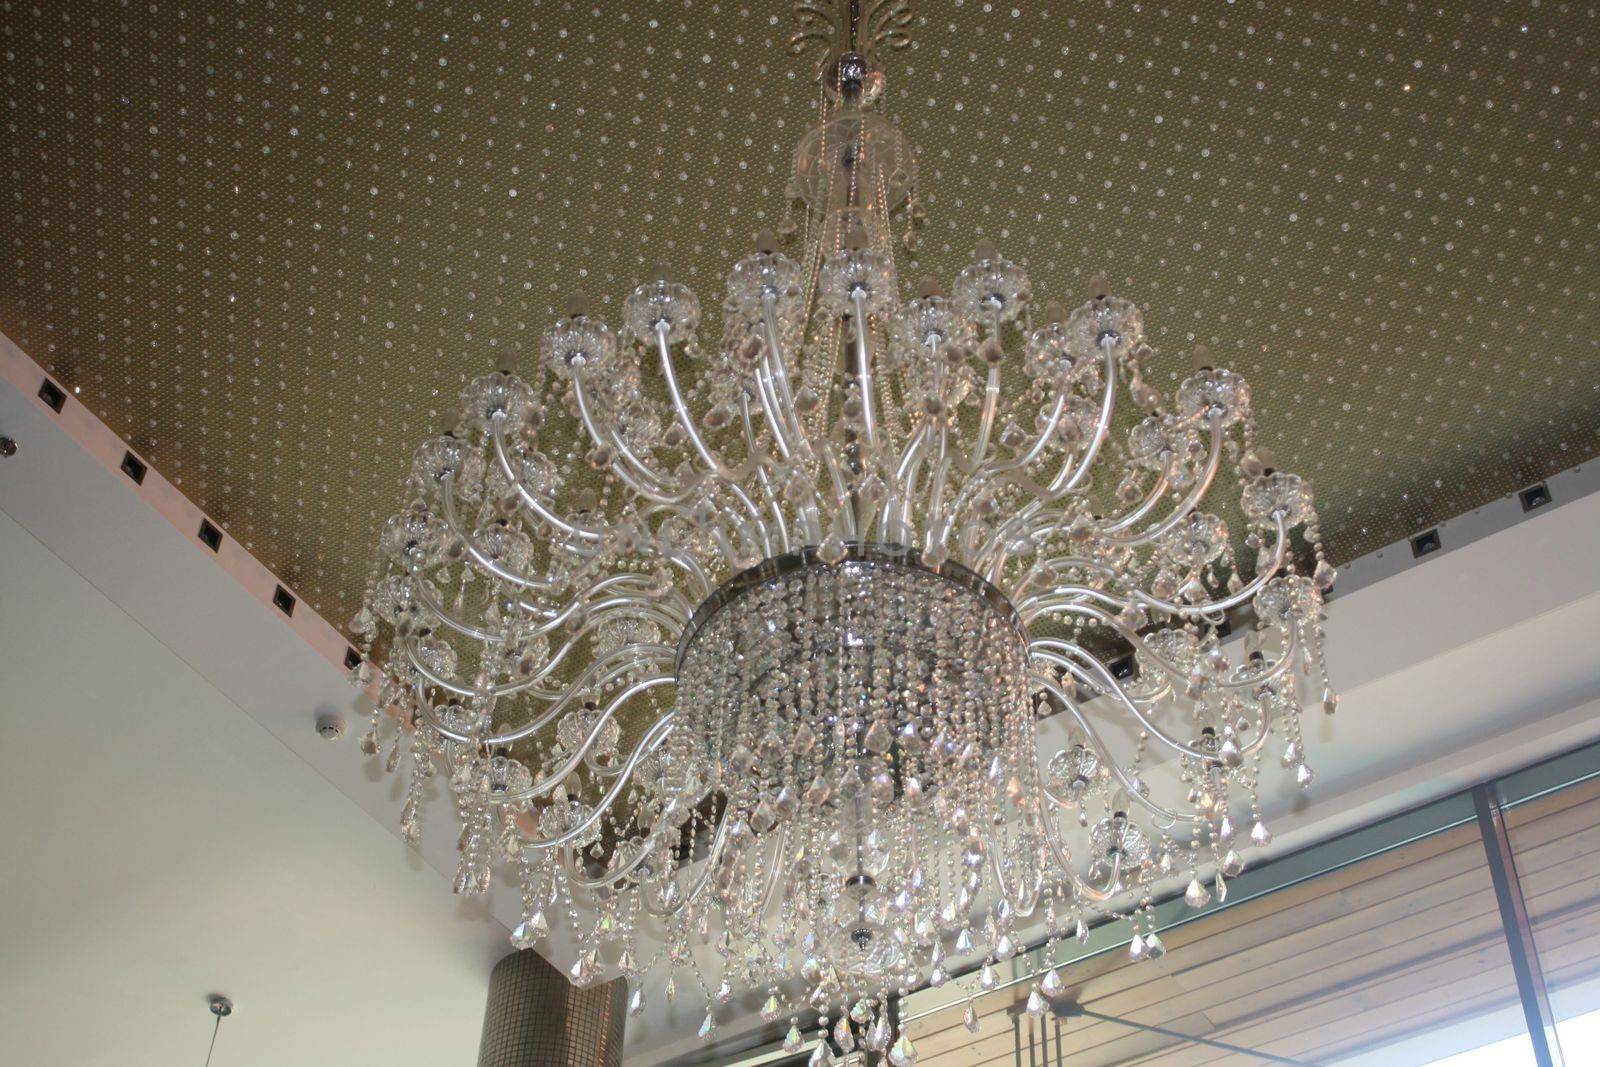 A chandelier hanging from the ceiling. High quality photo